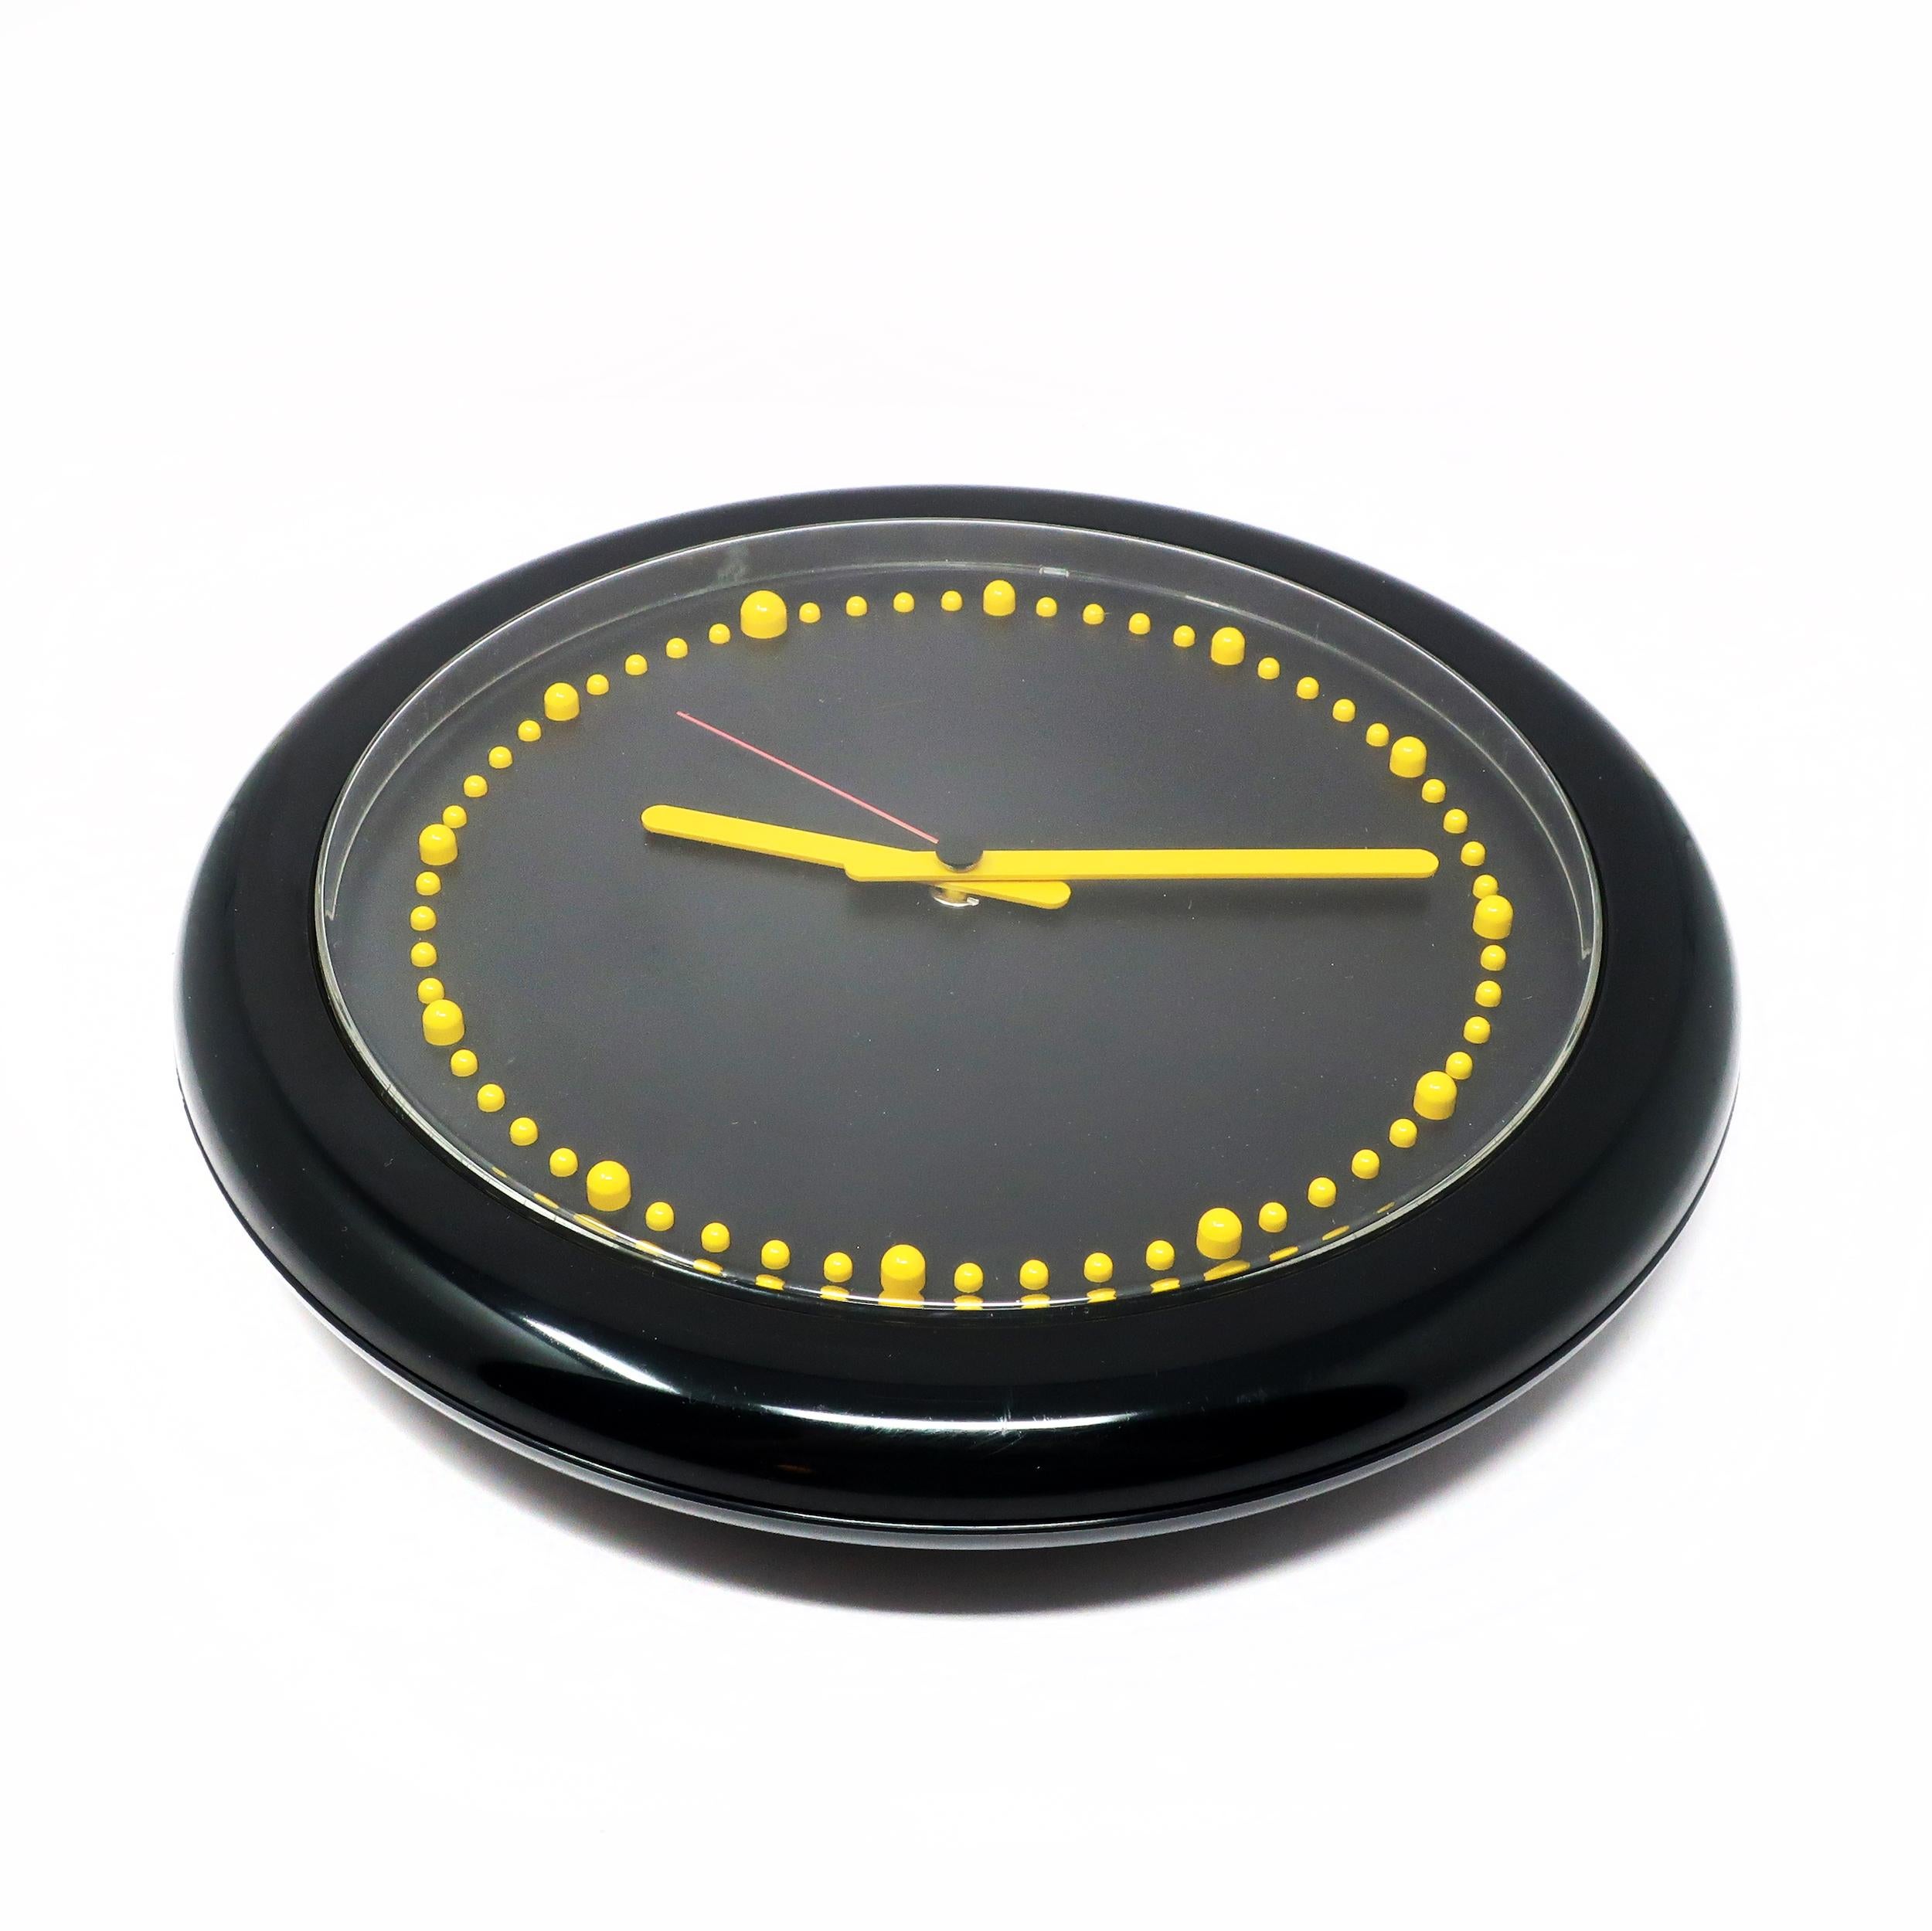 Designed by Raul Barbieri and Giorgio Marianelli for Rexite in 1981, this Zero 980 wall clock has a striking yellow and black color combination. Black plastic case, yellow hands, and raised yellow plastic bumps for the clock's numbers and a black